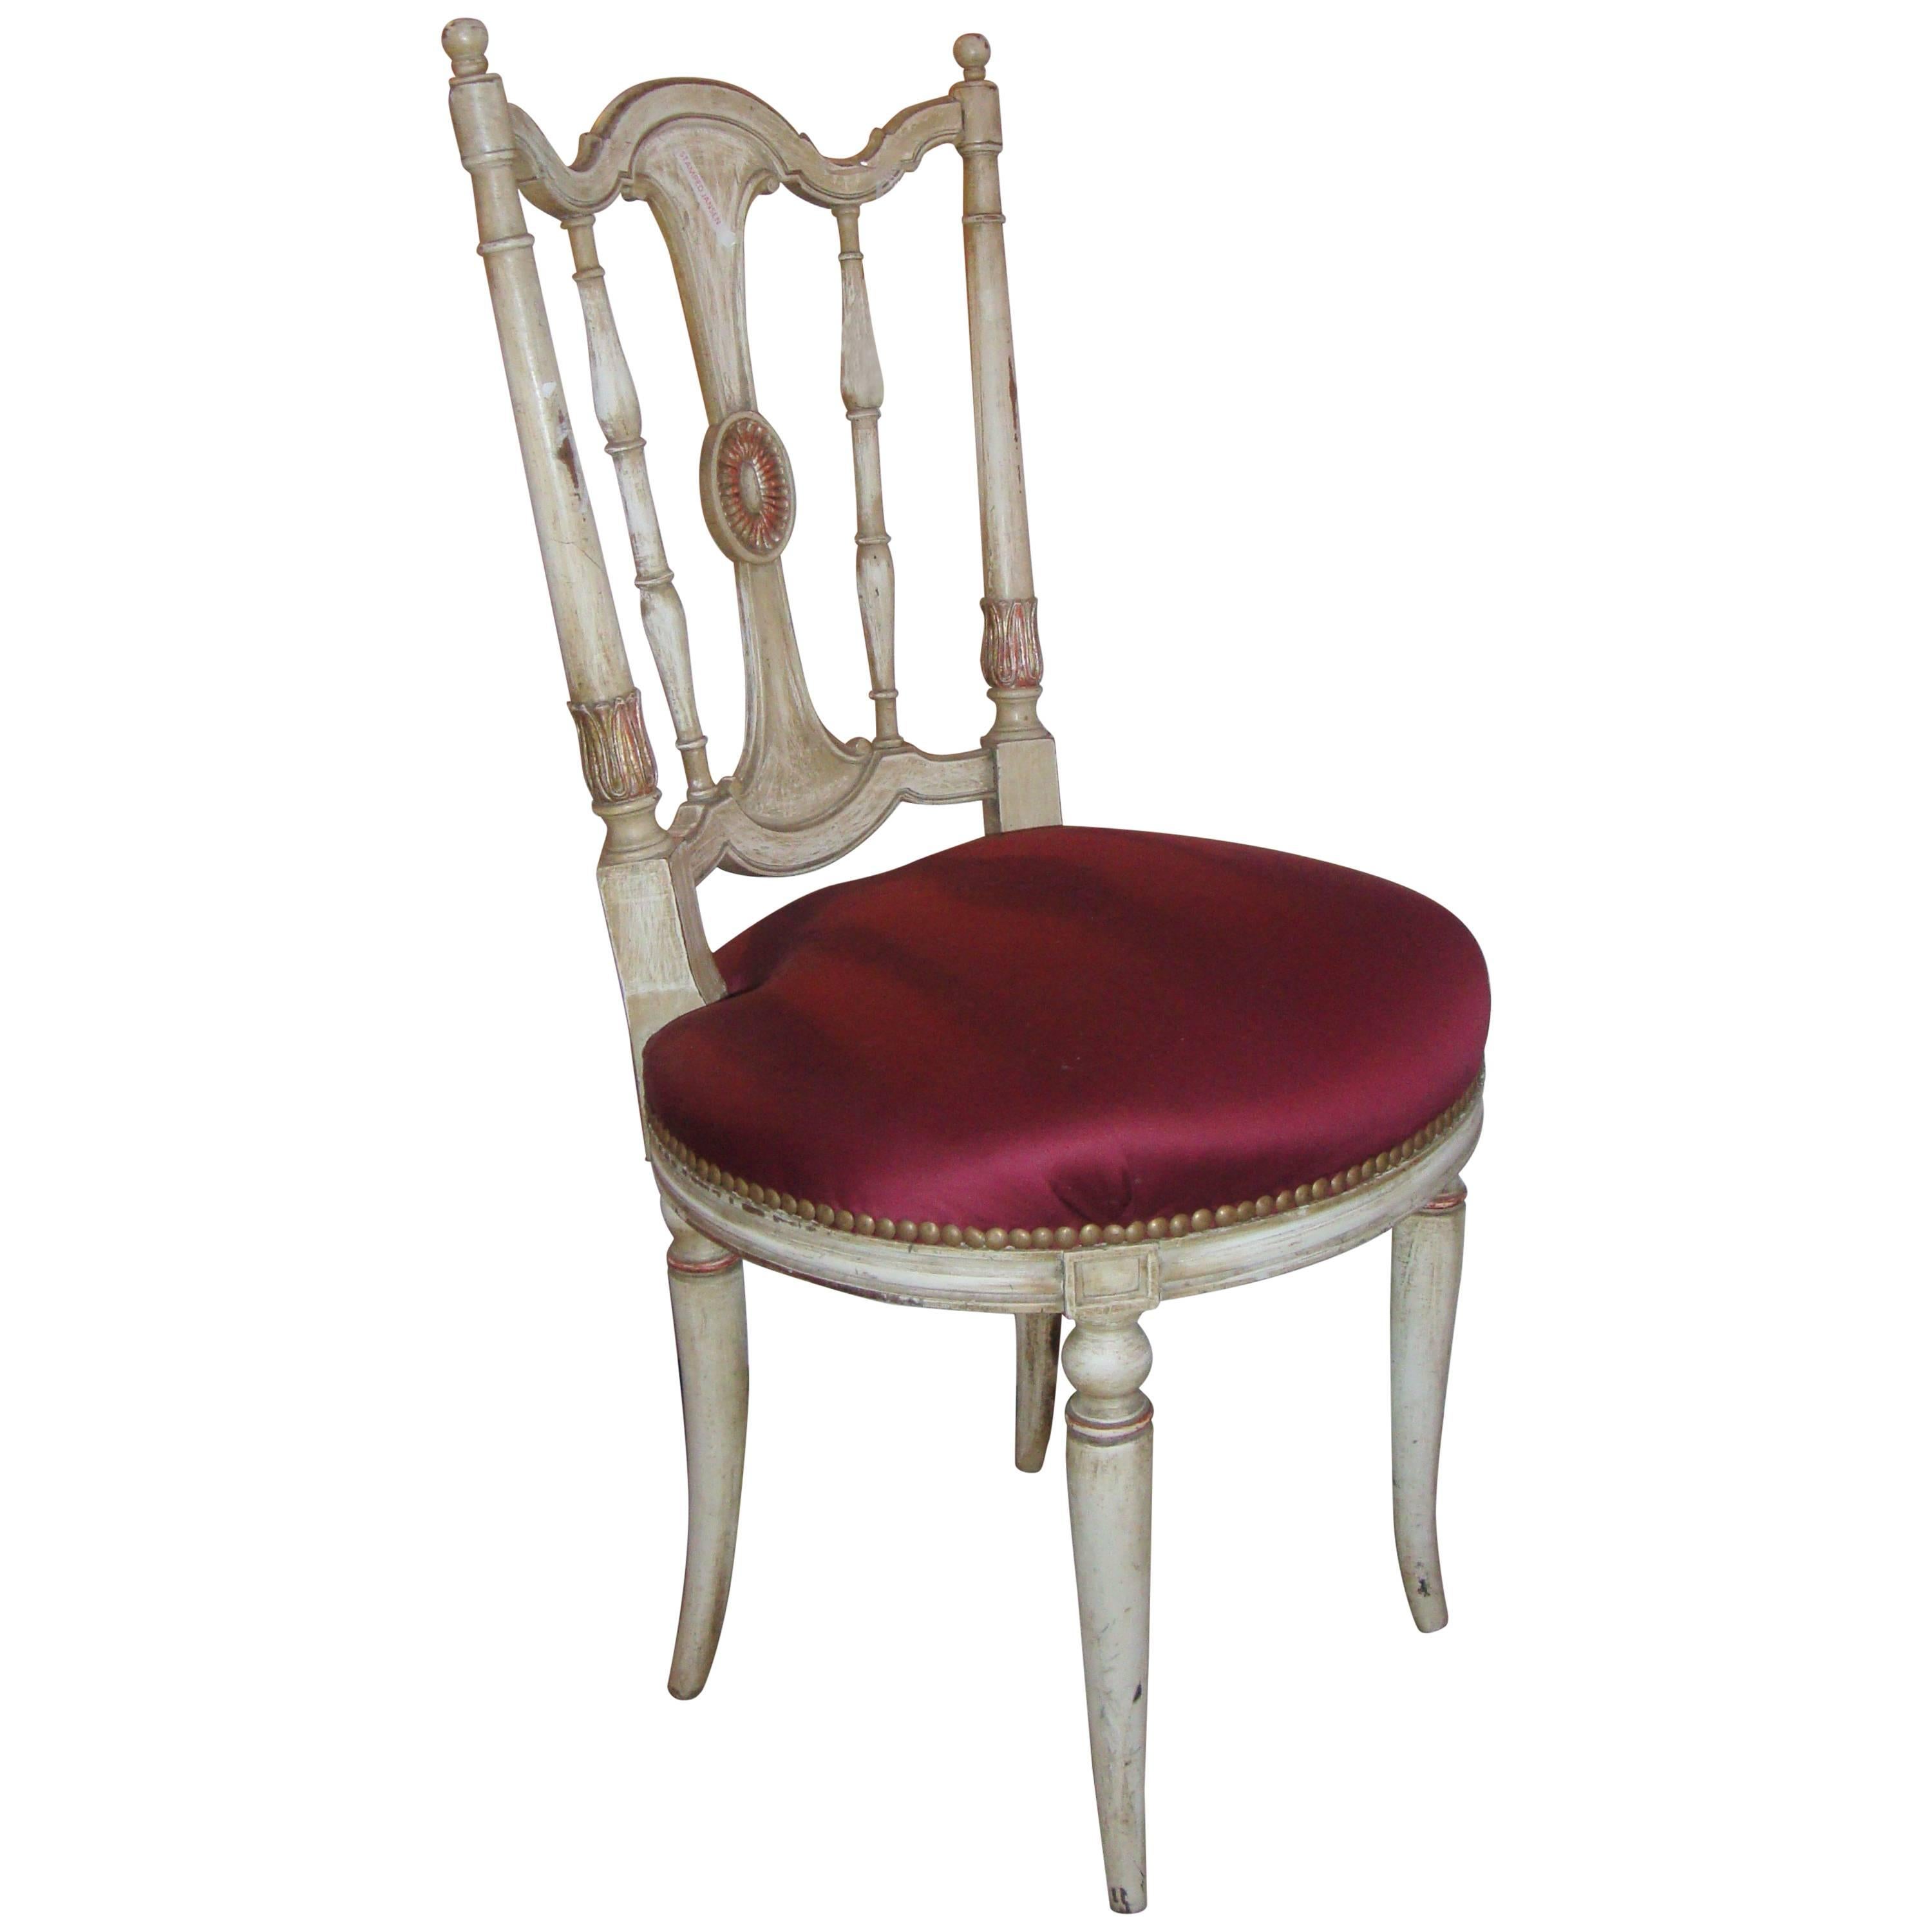 Distress Painted Lady’s Side or Desk Chair